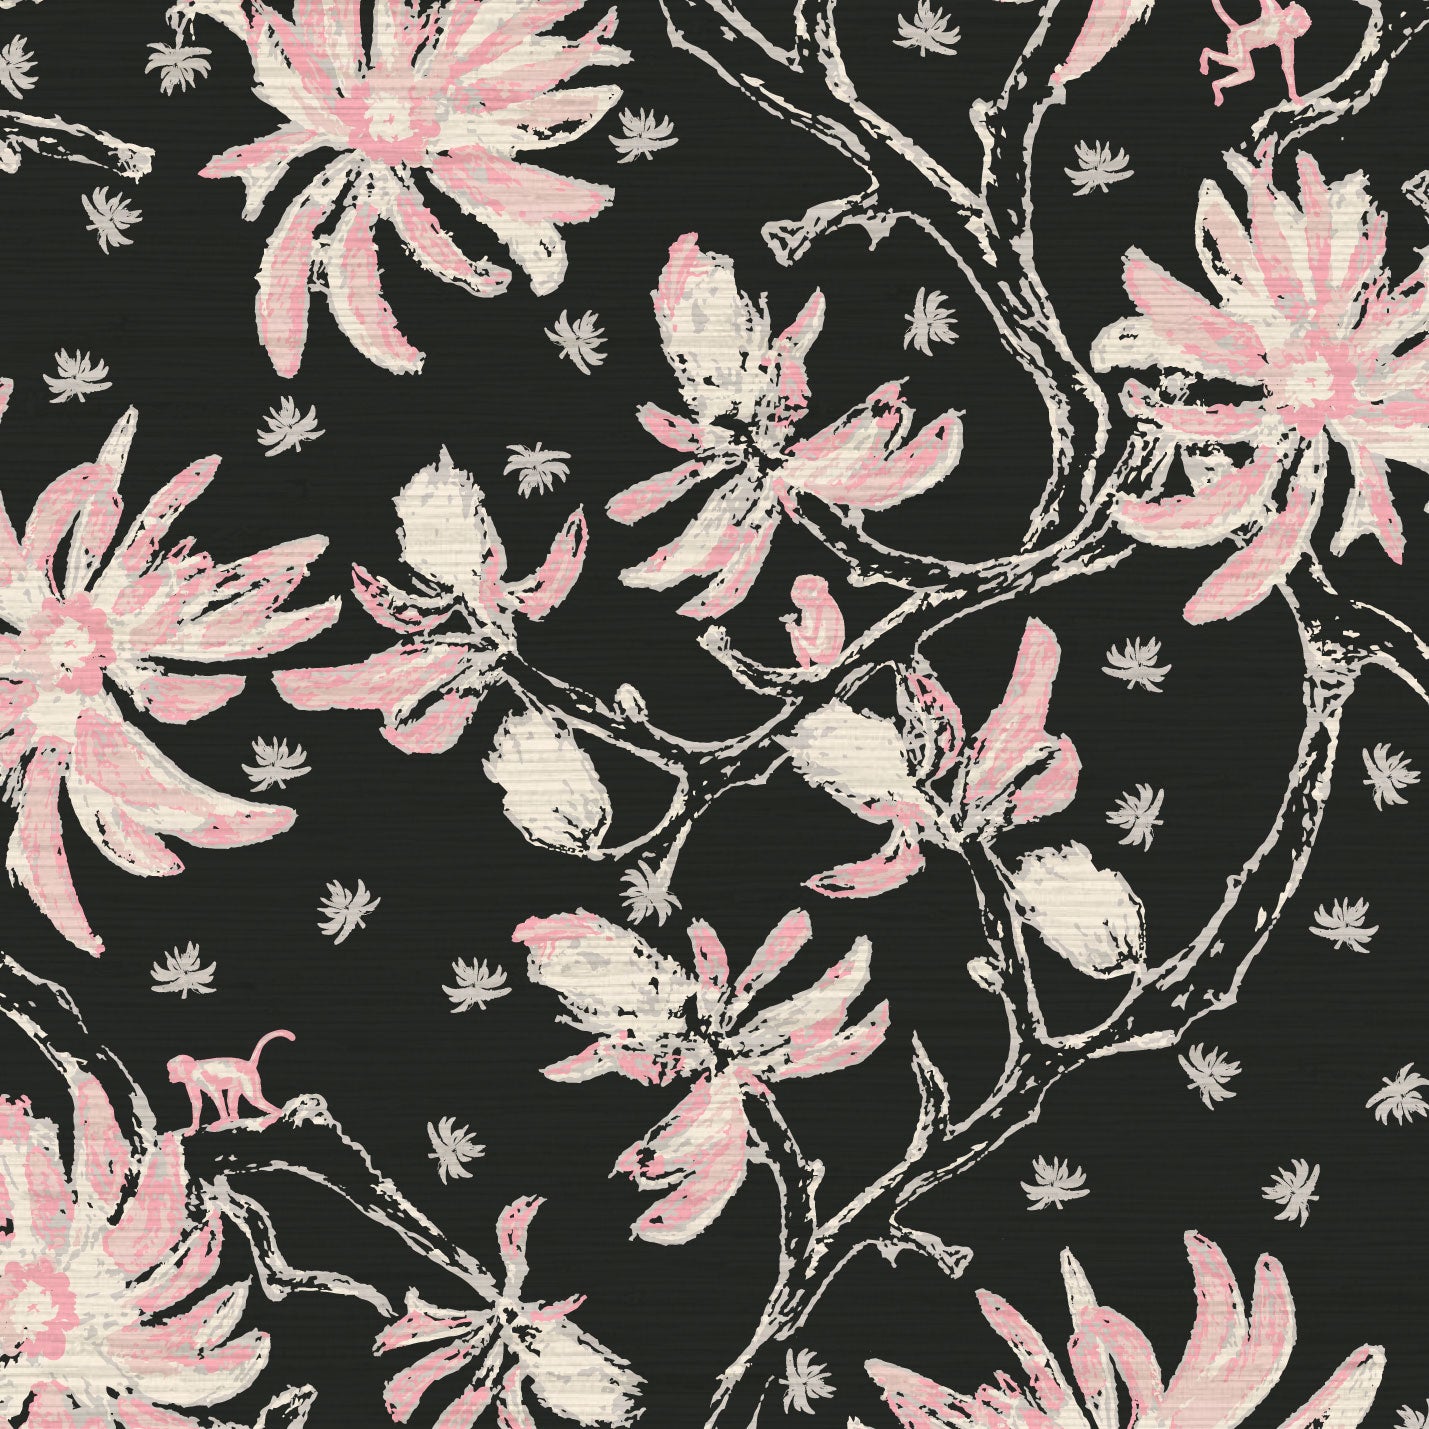 black pink pale pink pink flowers Natural Textured Eco-Friendly Non-toxic High-quality Sustainable practices Sustainability Wall covering Wallcovering Wallpaper Luxury Contemporary Designer Custom interior Bespoke Tailor-made Nature inspired Bold Garden Wallpaper Chinoiserie Asian inspired chinz tree branches flowers flower floral garden monkey animal chinese asian inspired grasscloth